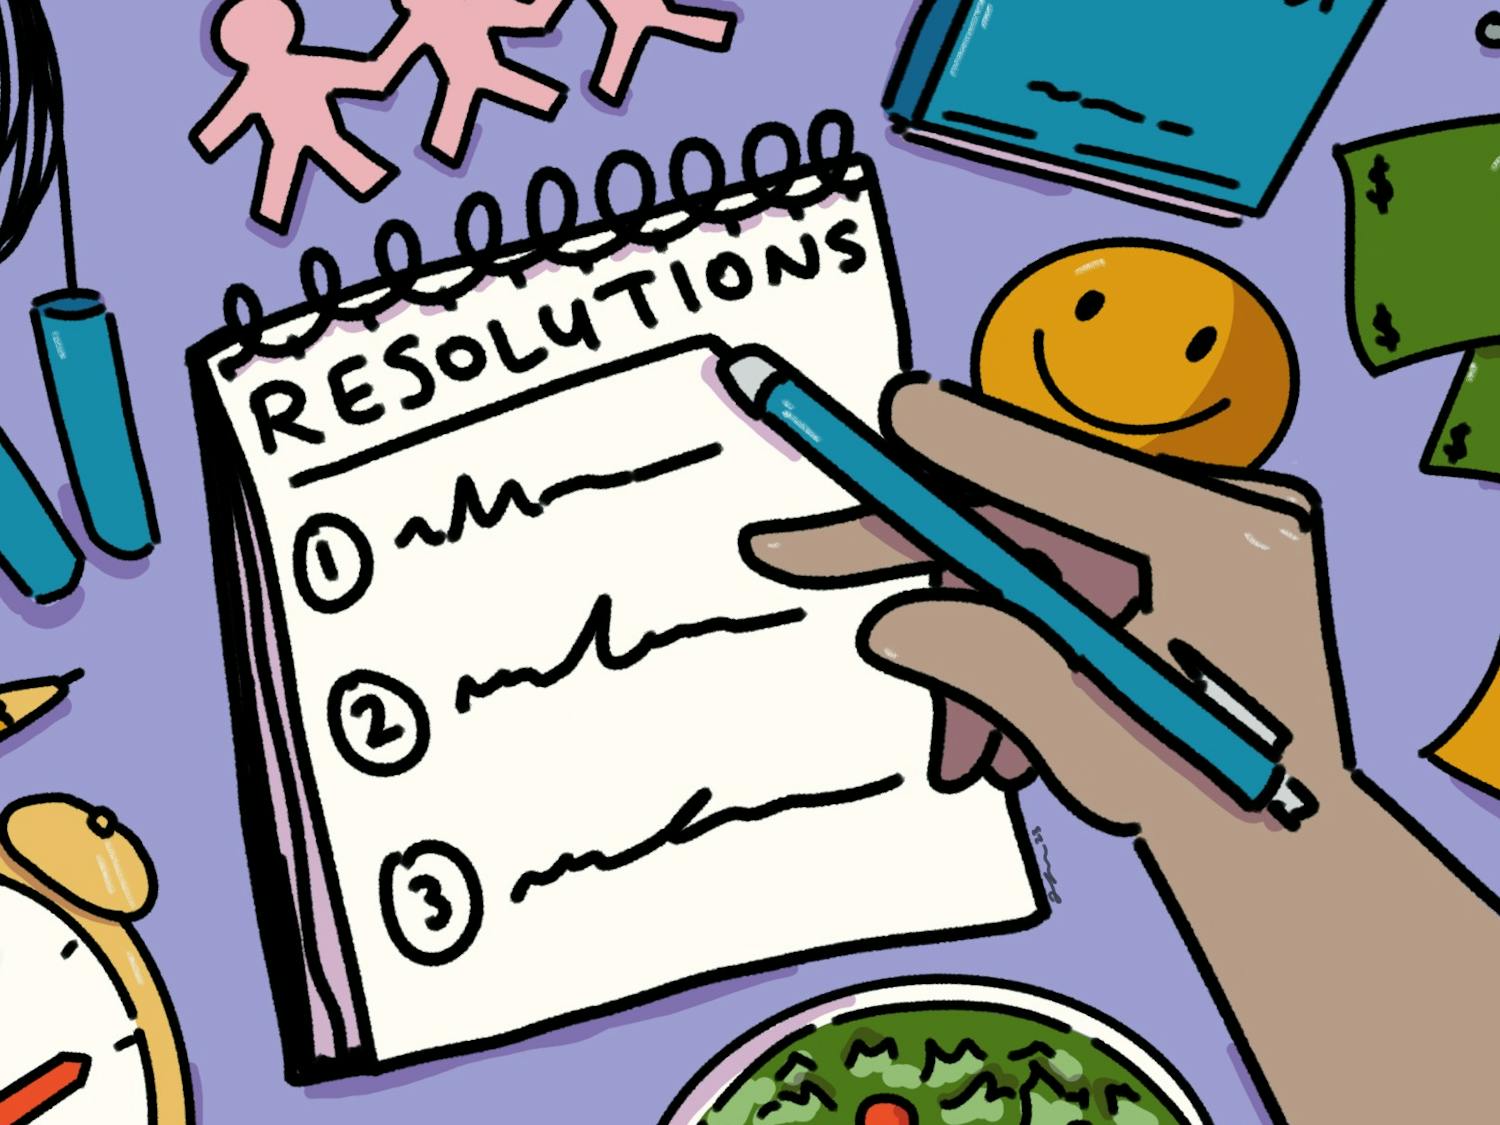 New Year's Resolution